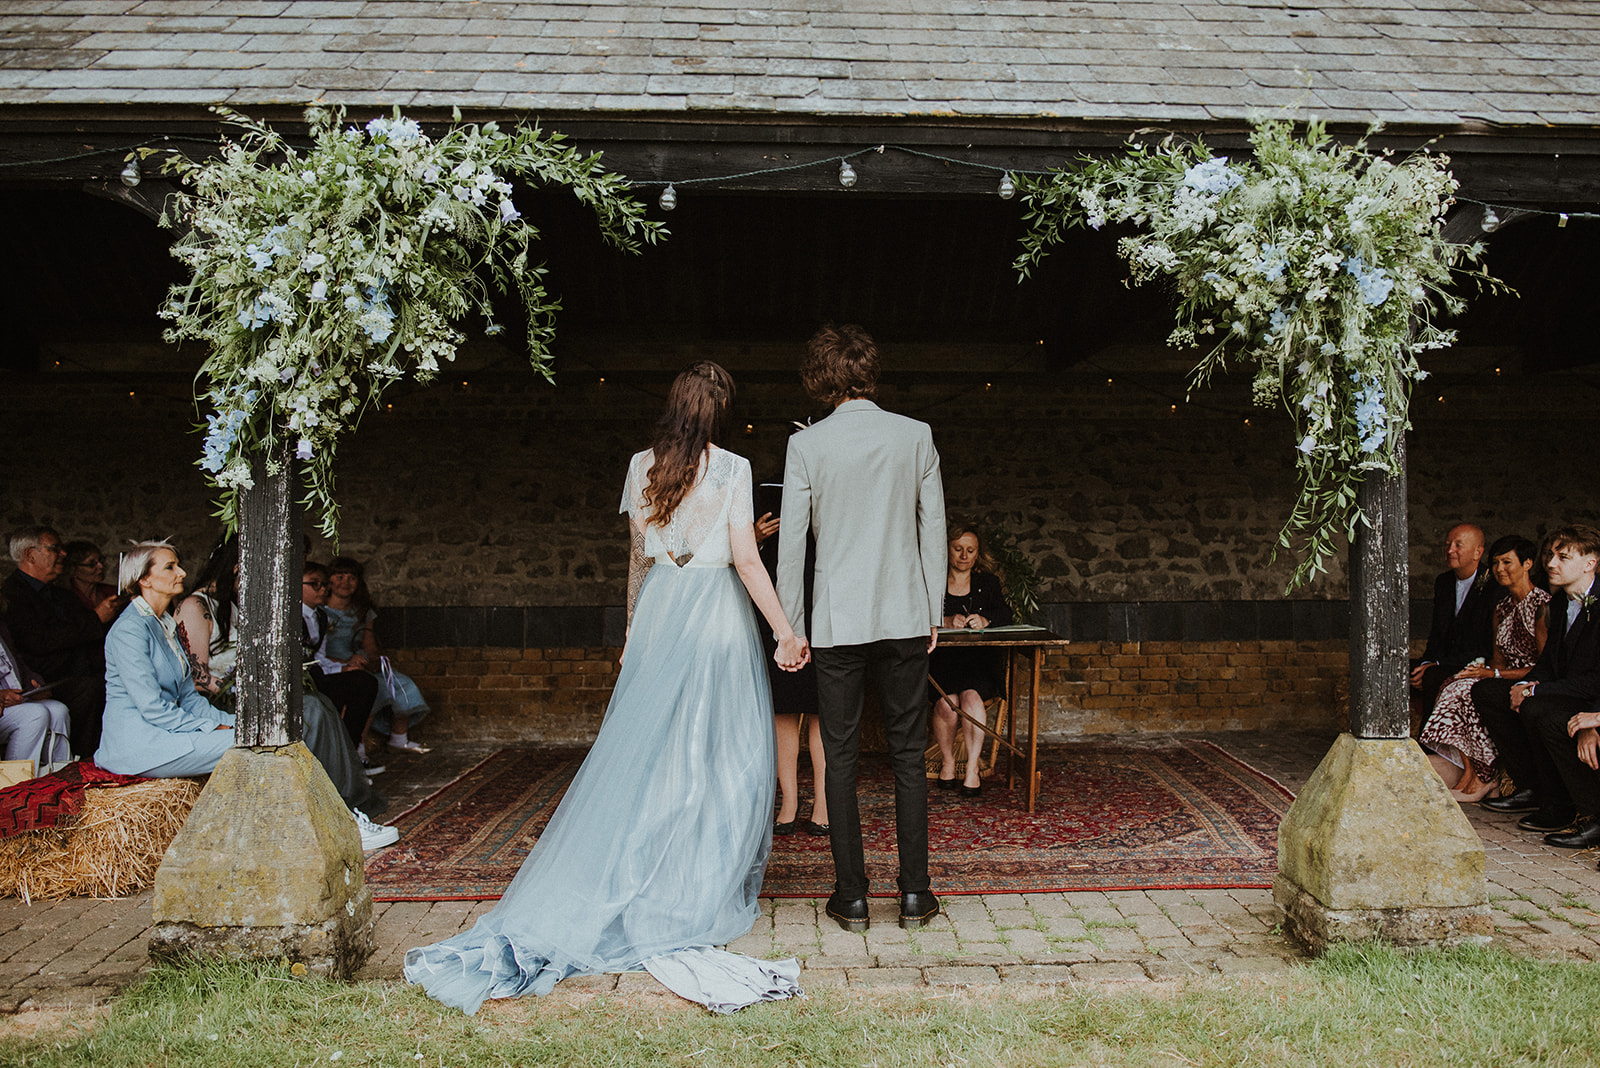 The wedding ceremony was simple and sweet, with blue blooms and greenery